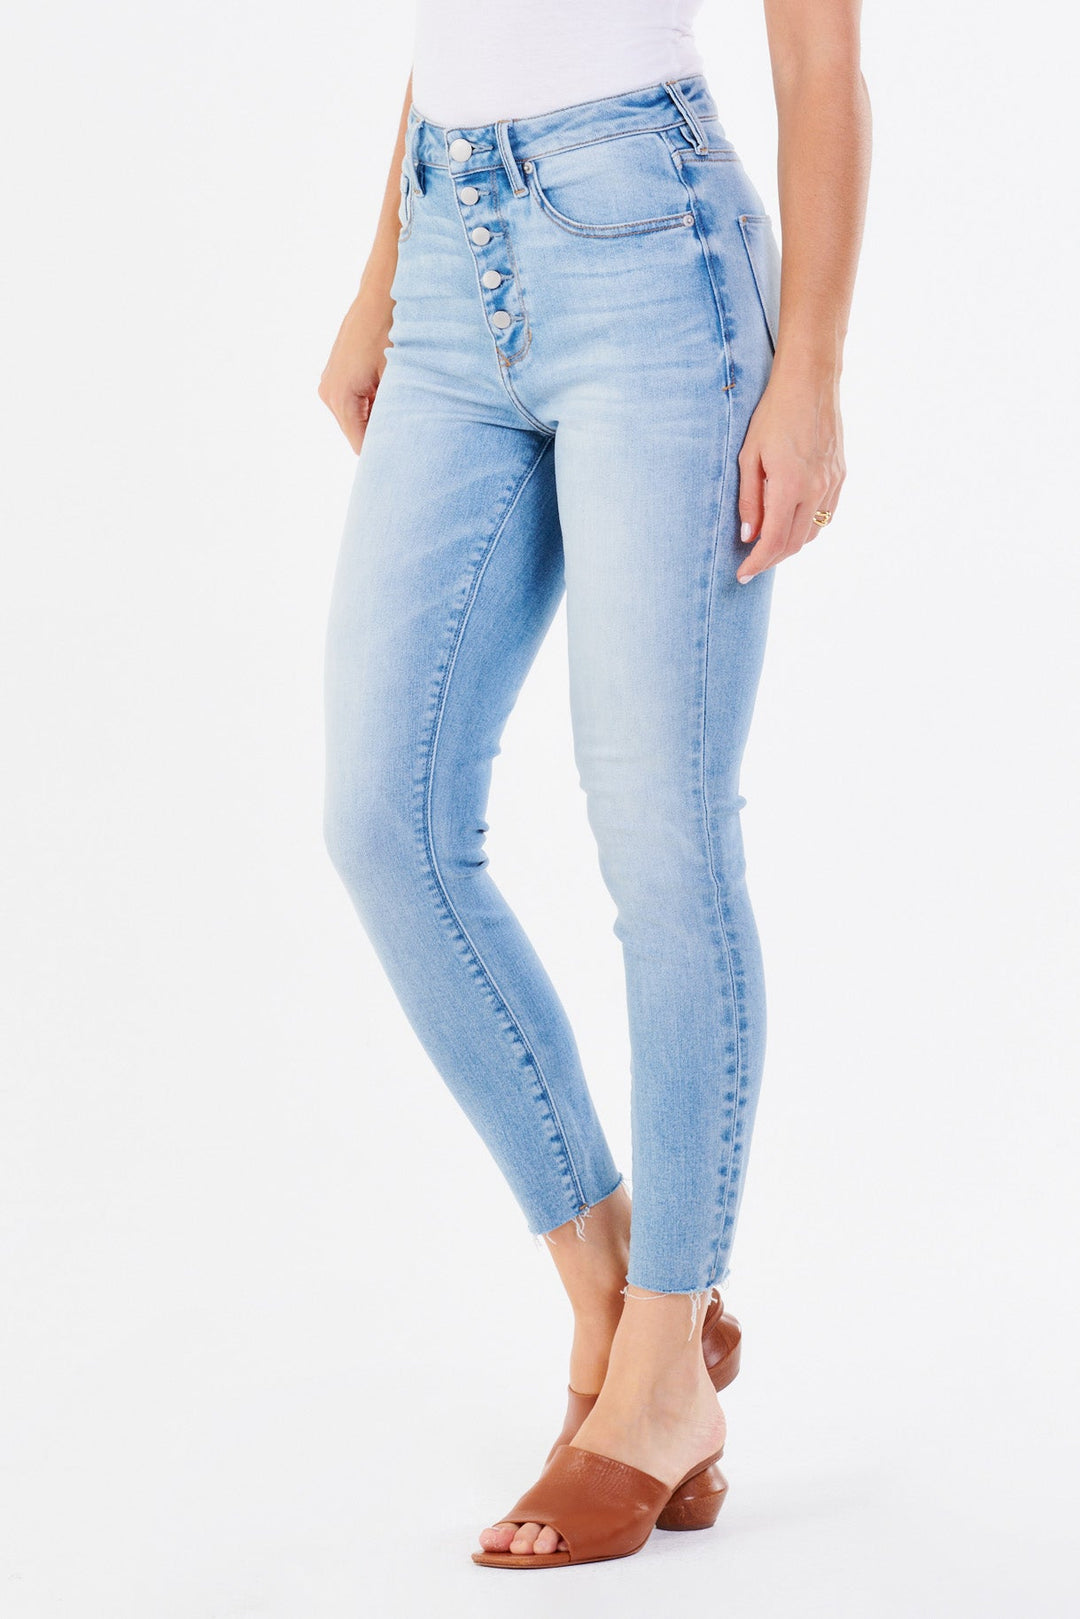 image of a female model wearing a OLIVIA SUPER HIGH RISE ANKLE SKINNY JEANS DOWNTOWN JEANS